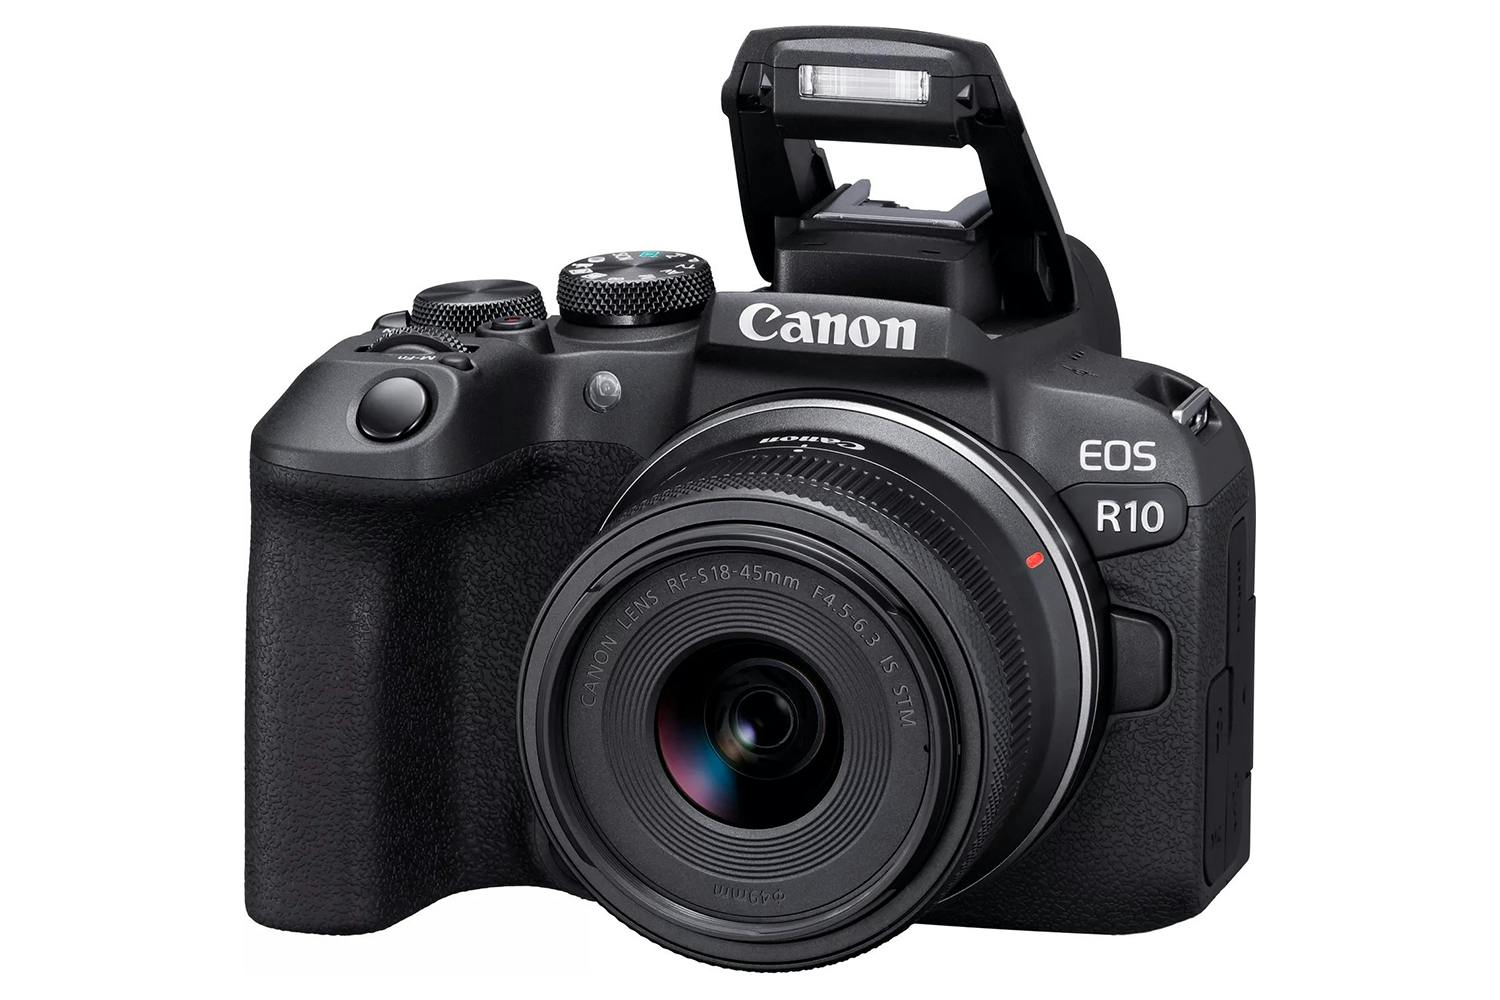  Canon EOS R10 RF-S18-45mm F4.5-6.3 is STM Lens Kit, Mirrorless  Vlogging Camera, 24.2 MP, 4K Video, DIGIC X Image Processor, High-Speed  Shooting, Subject Tracking, Compact, for Content Creators Black 